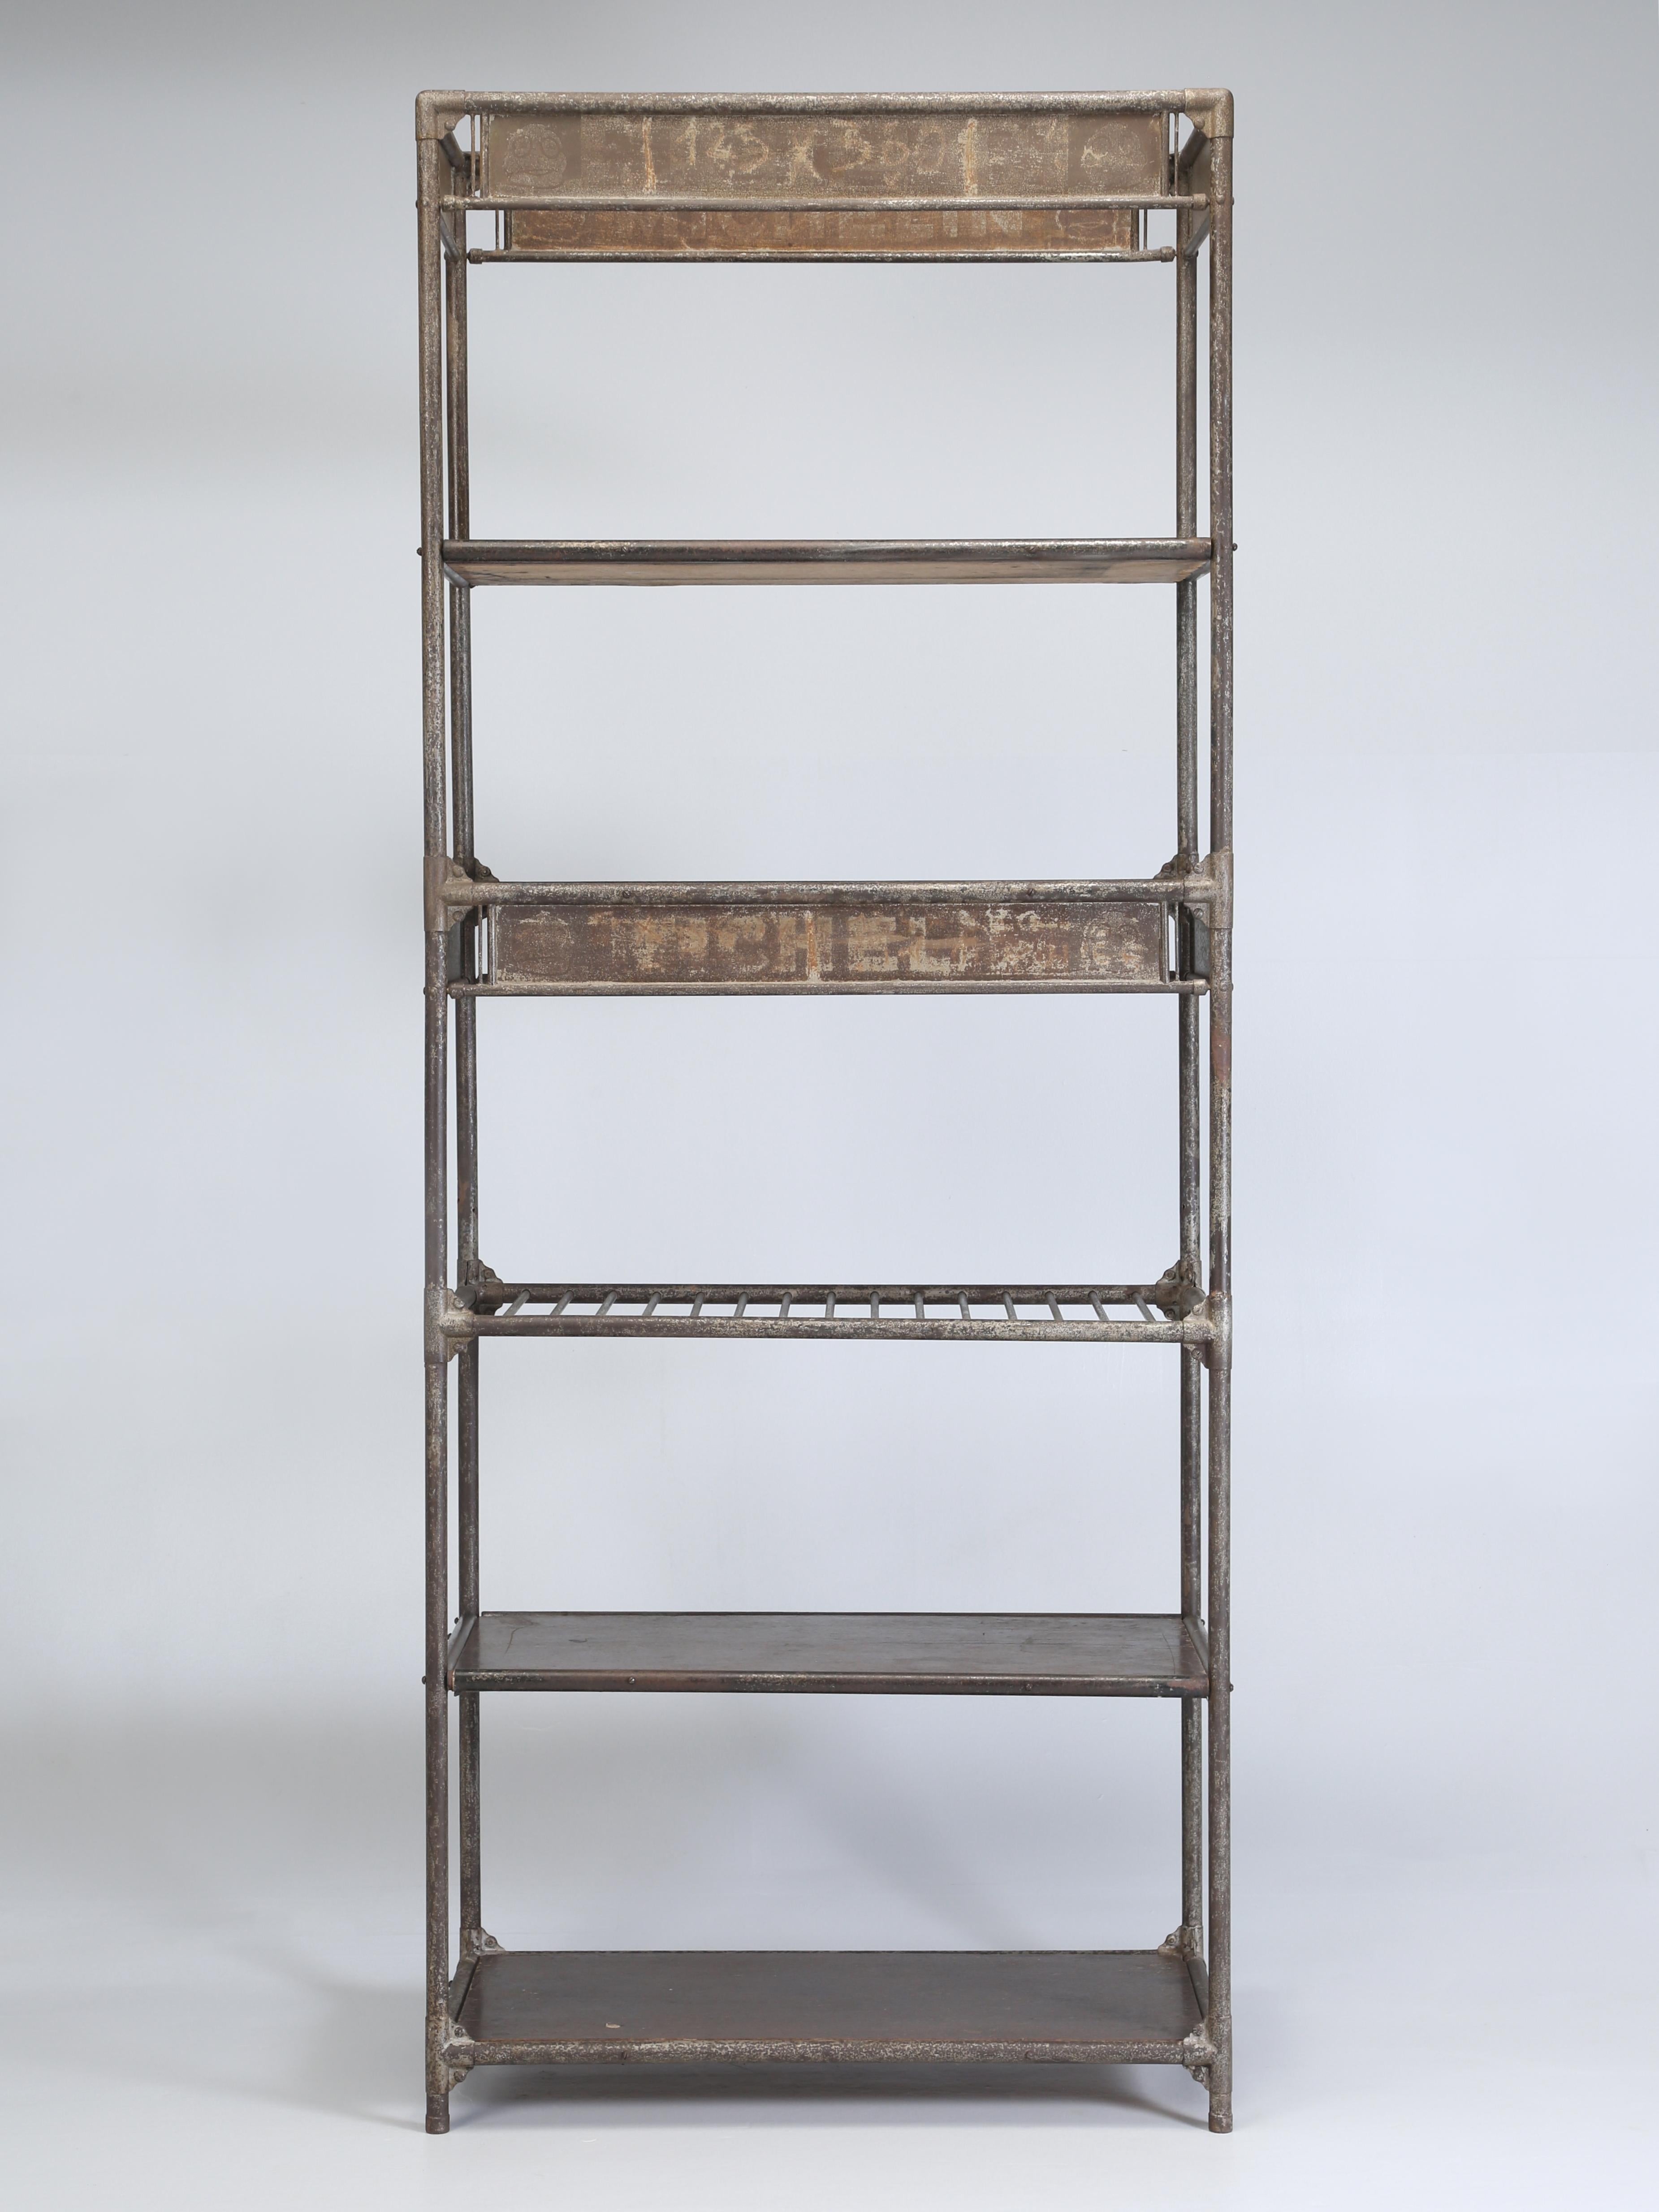 Michelin Antique French Industrial Steel Shelf Unit Made in France c1900-1920 For Sale 7